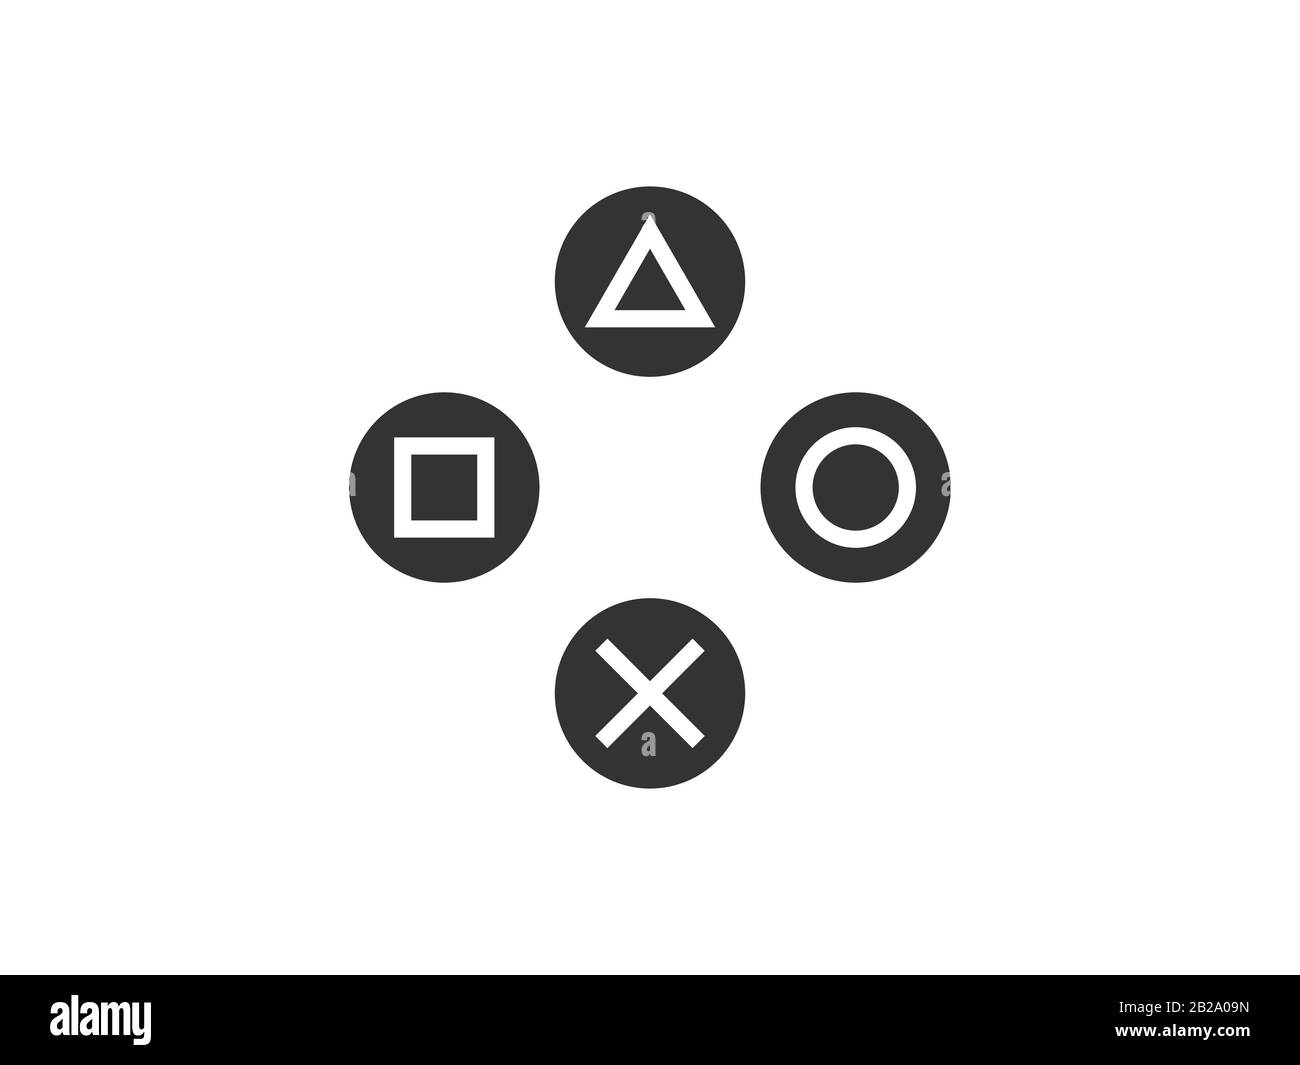 Gamepad control buttons icon. Vector illustration, flat design. Stock Vector